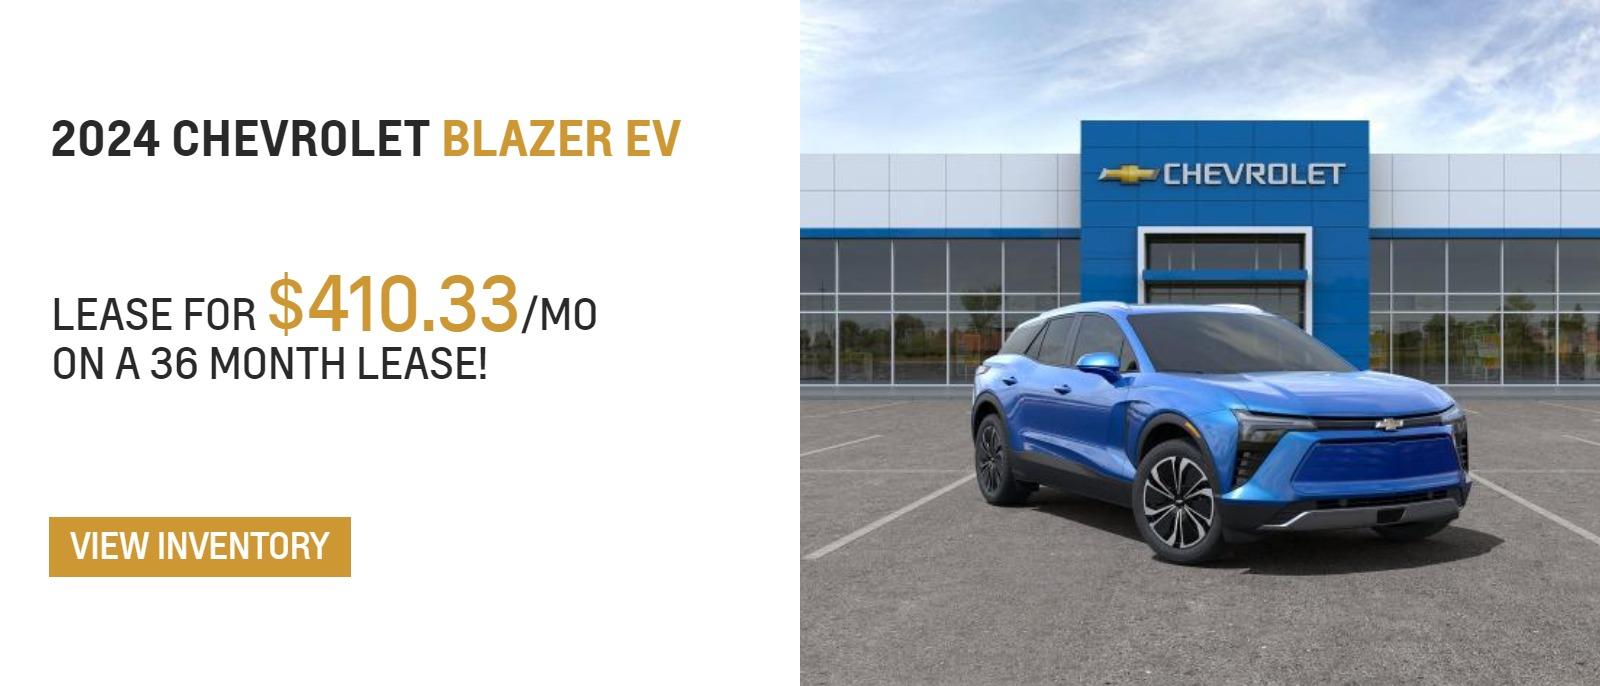 . Blazer EV lease for $410.33/mo on a 36 month lease!